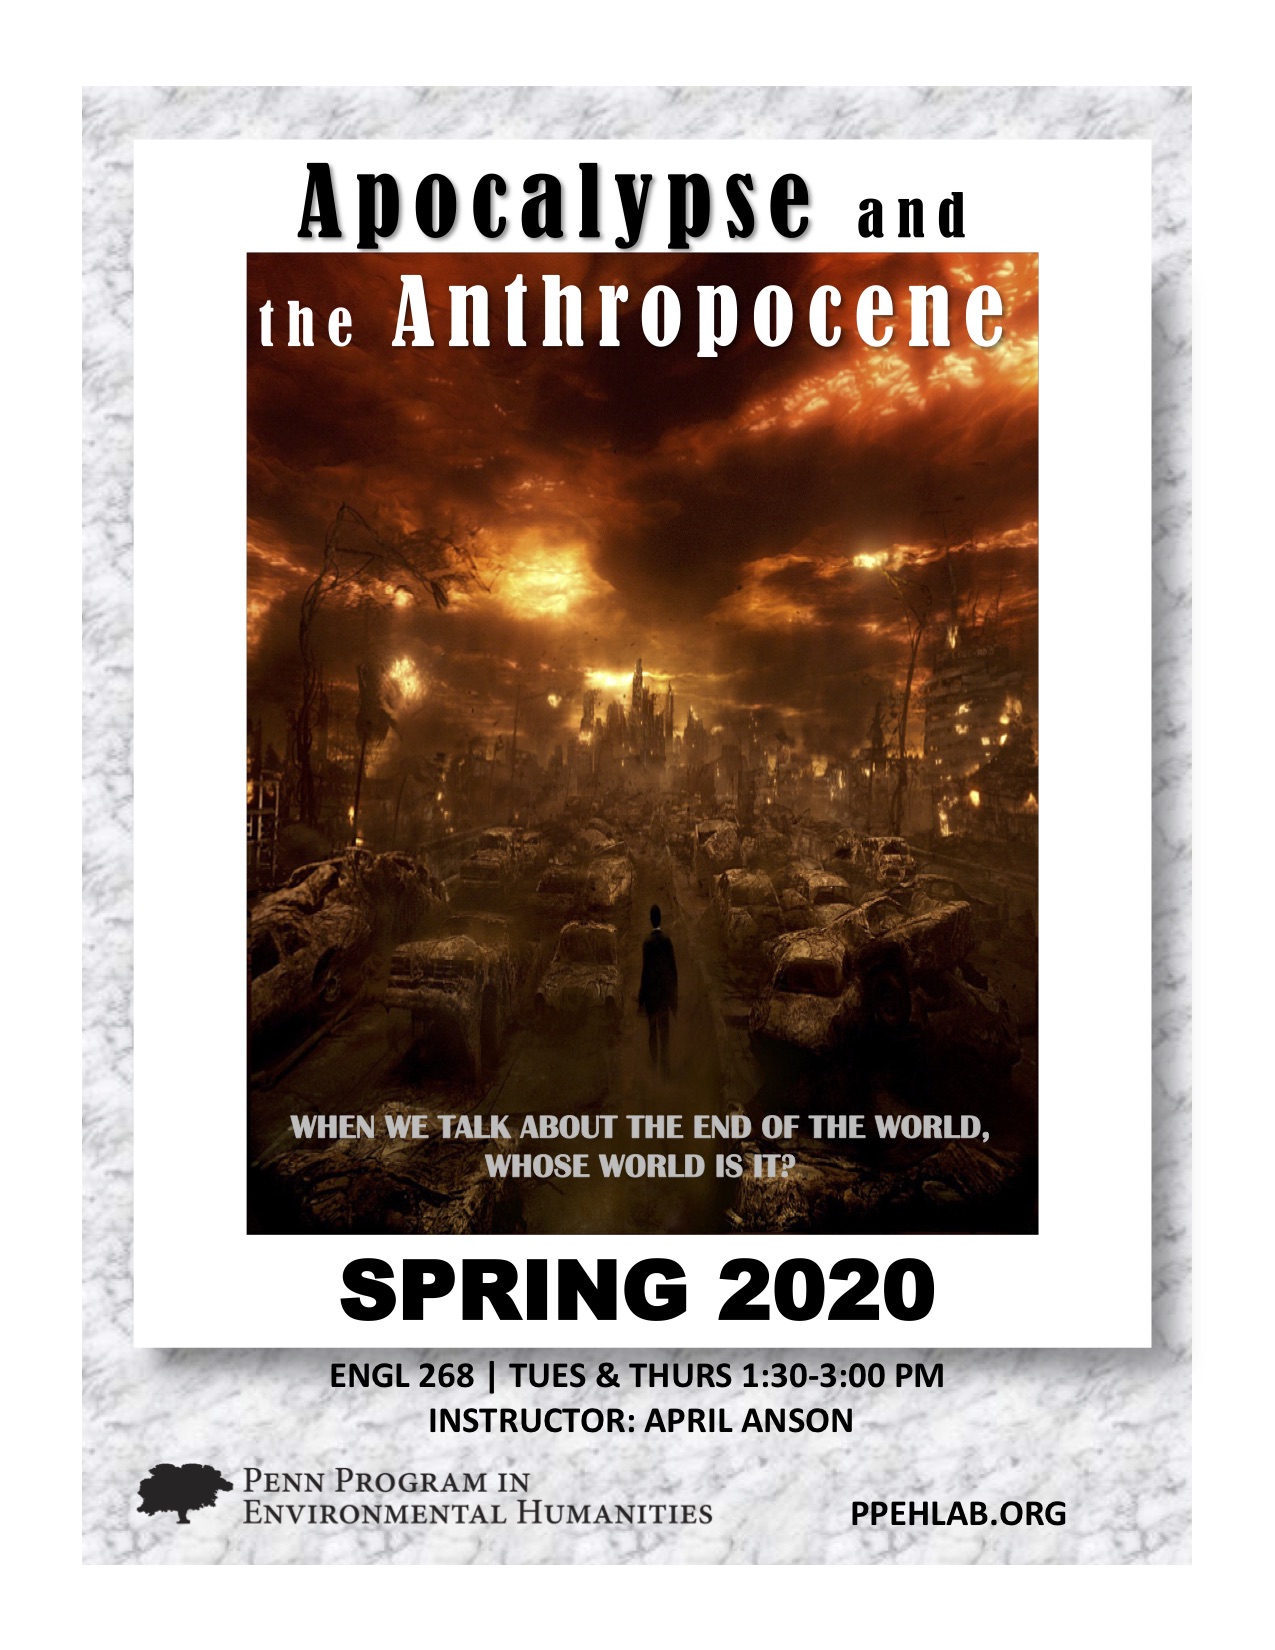 course poster including course information and an image of an apocolyptic scene of destruction with burned out cars on the side of the road and an orange-tinged smoke-filled sky above an urban skyline.